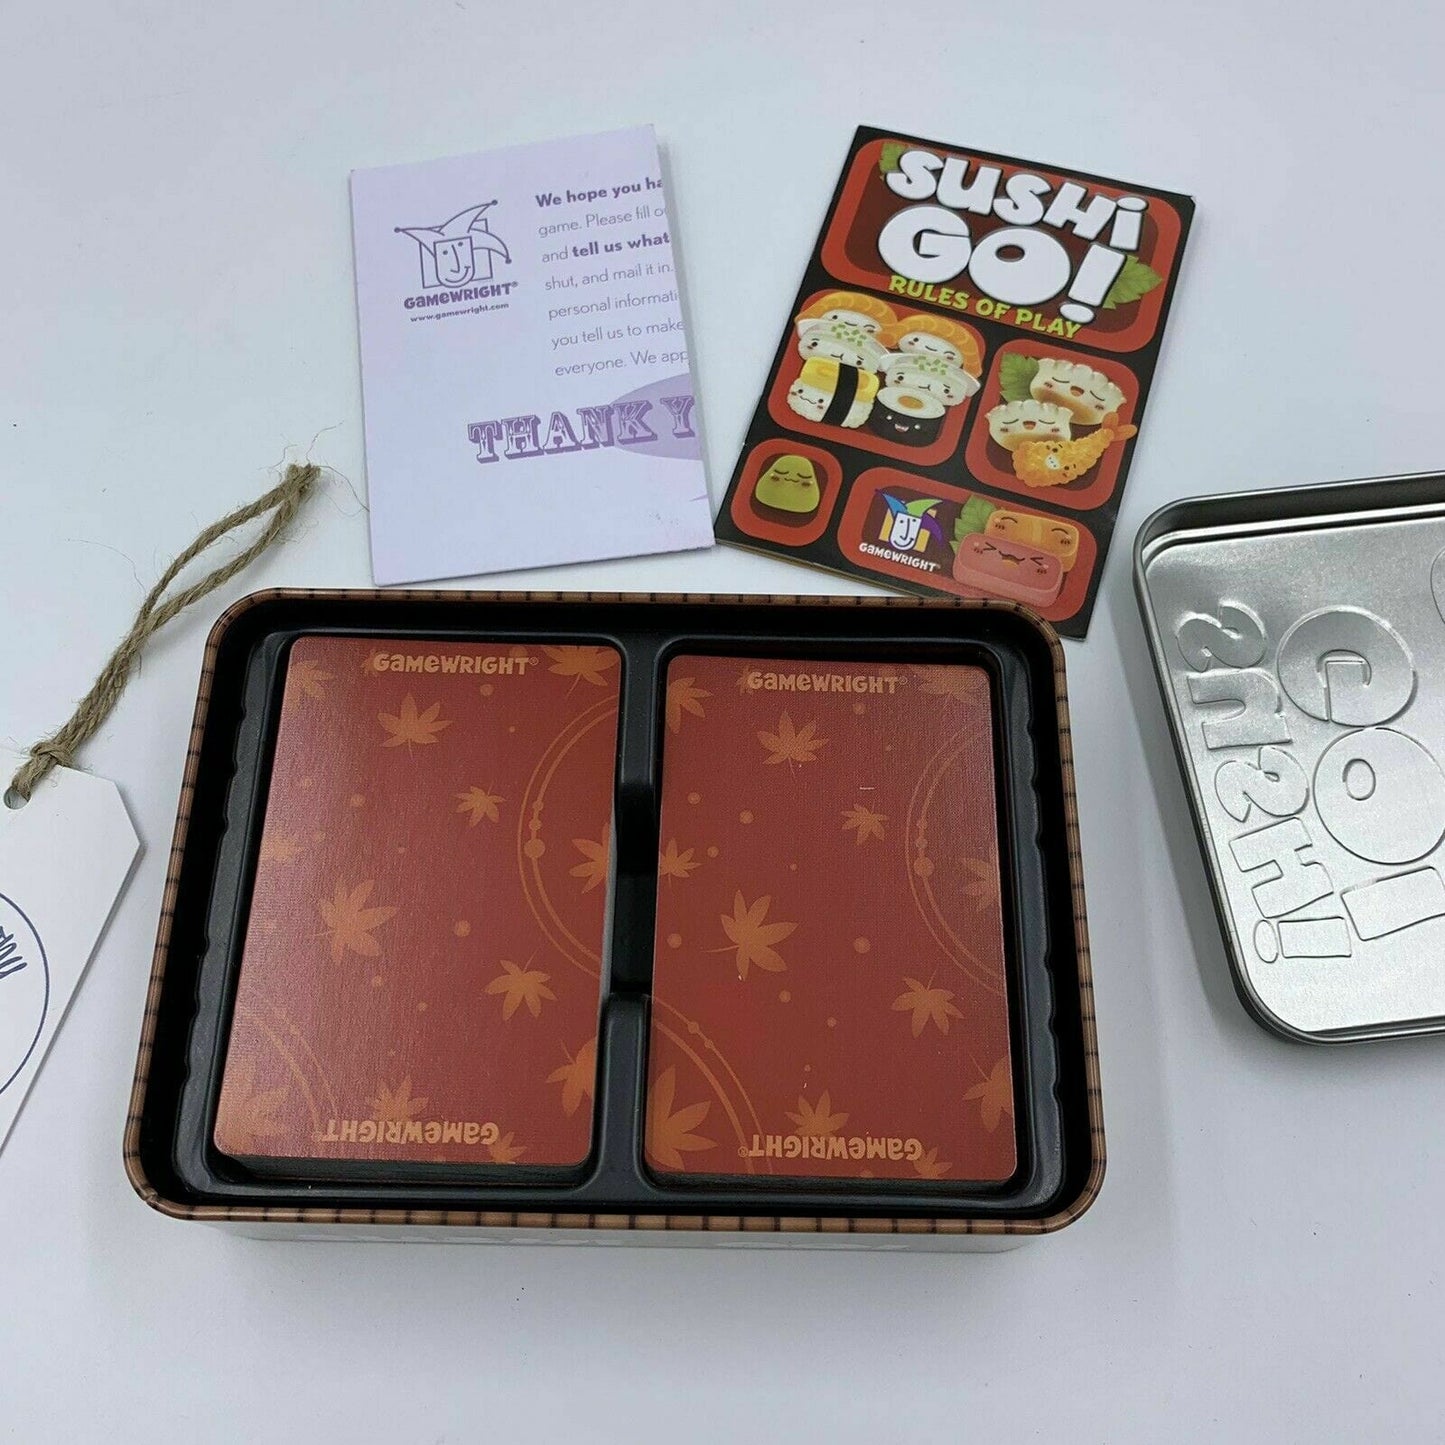 Sushi Go! By Gamewright The Pick & Pass Card Game Strategy & Probability Ages 8+